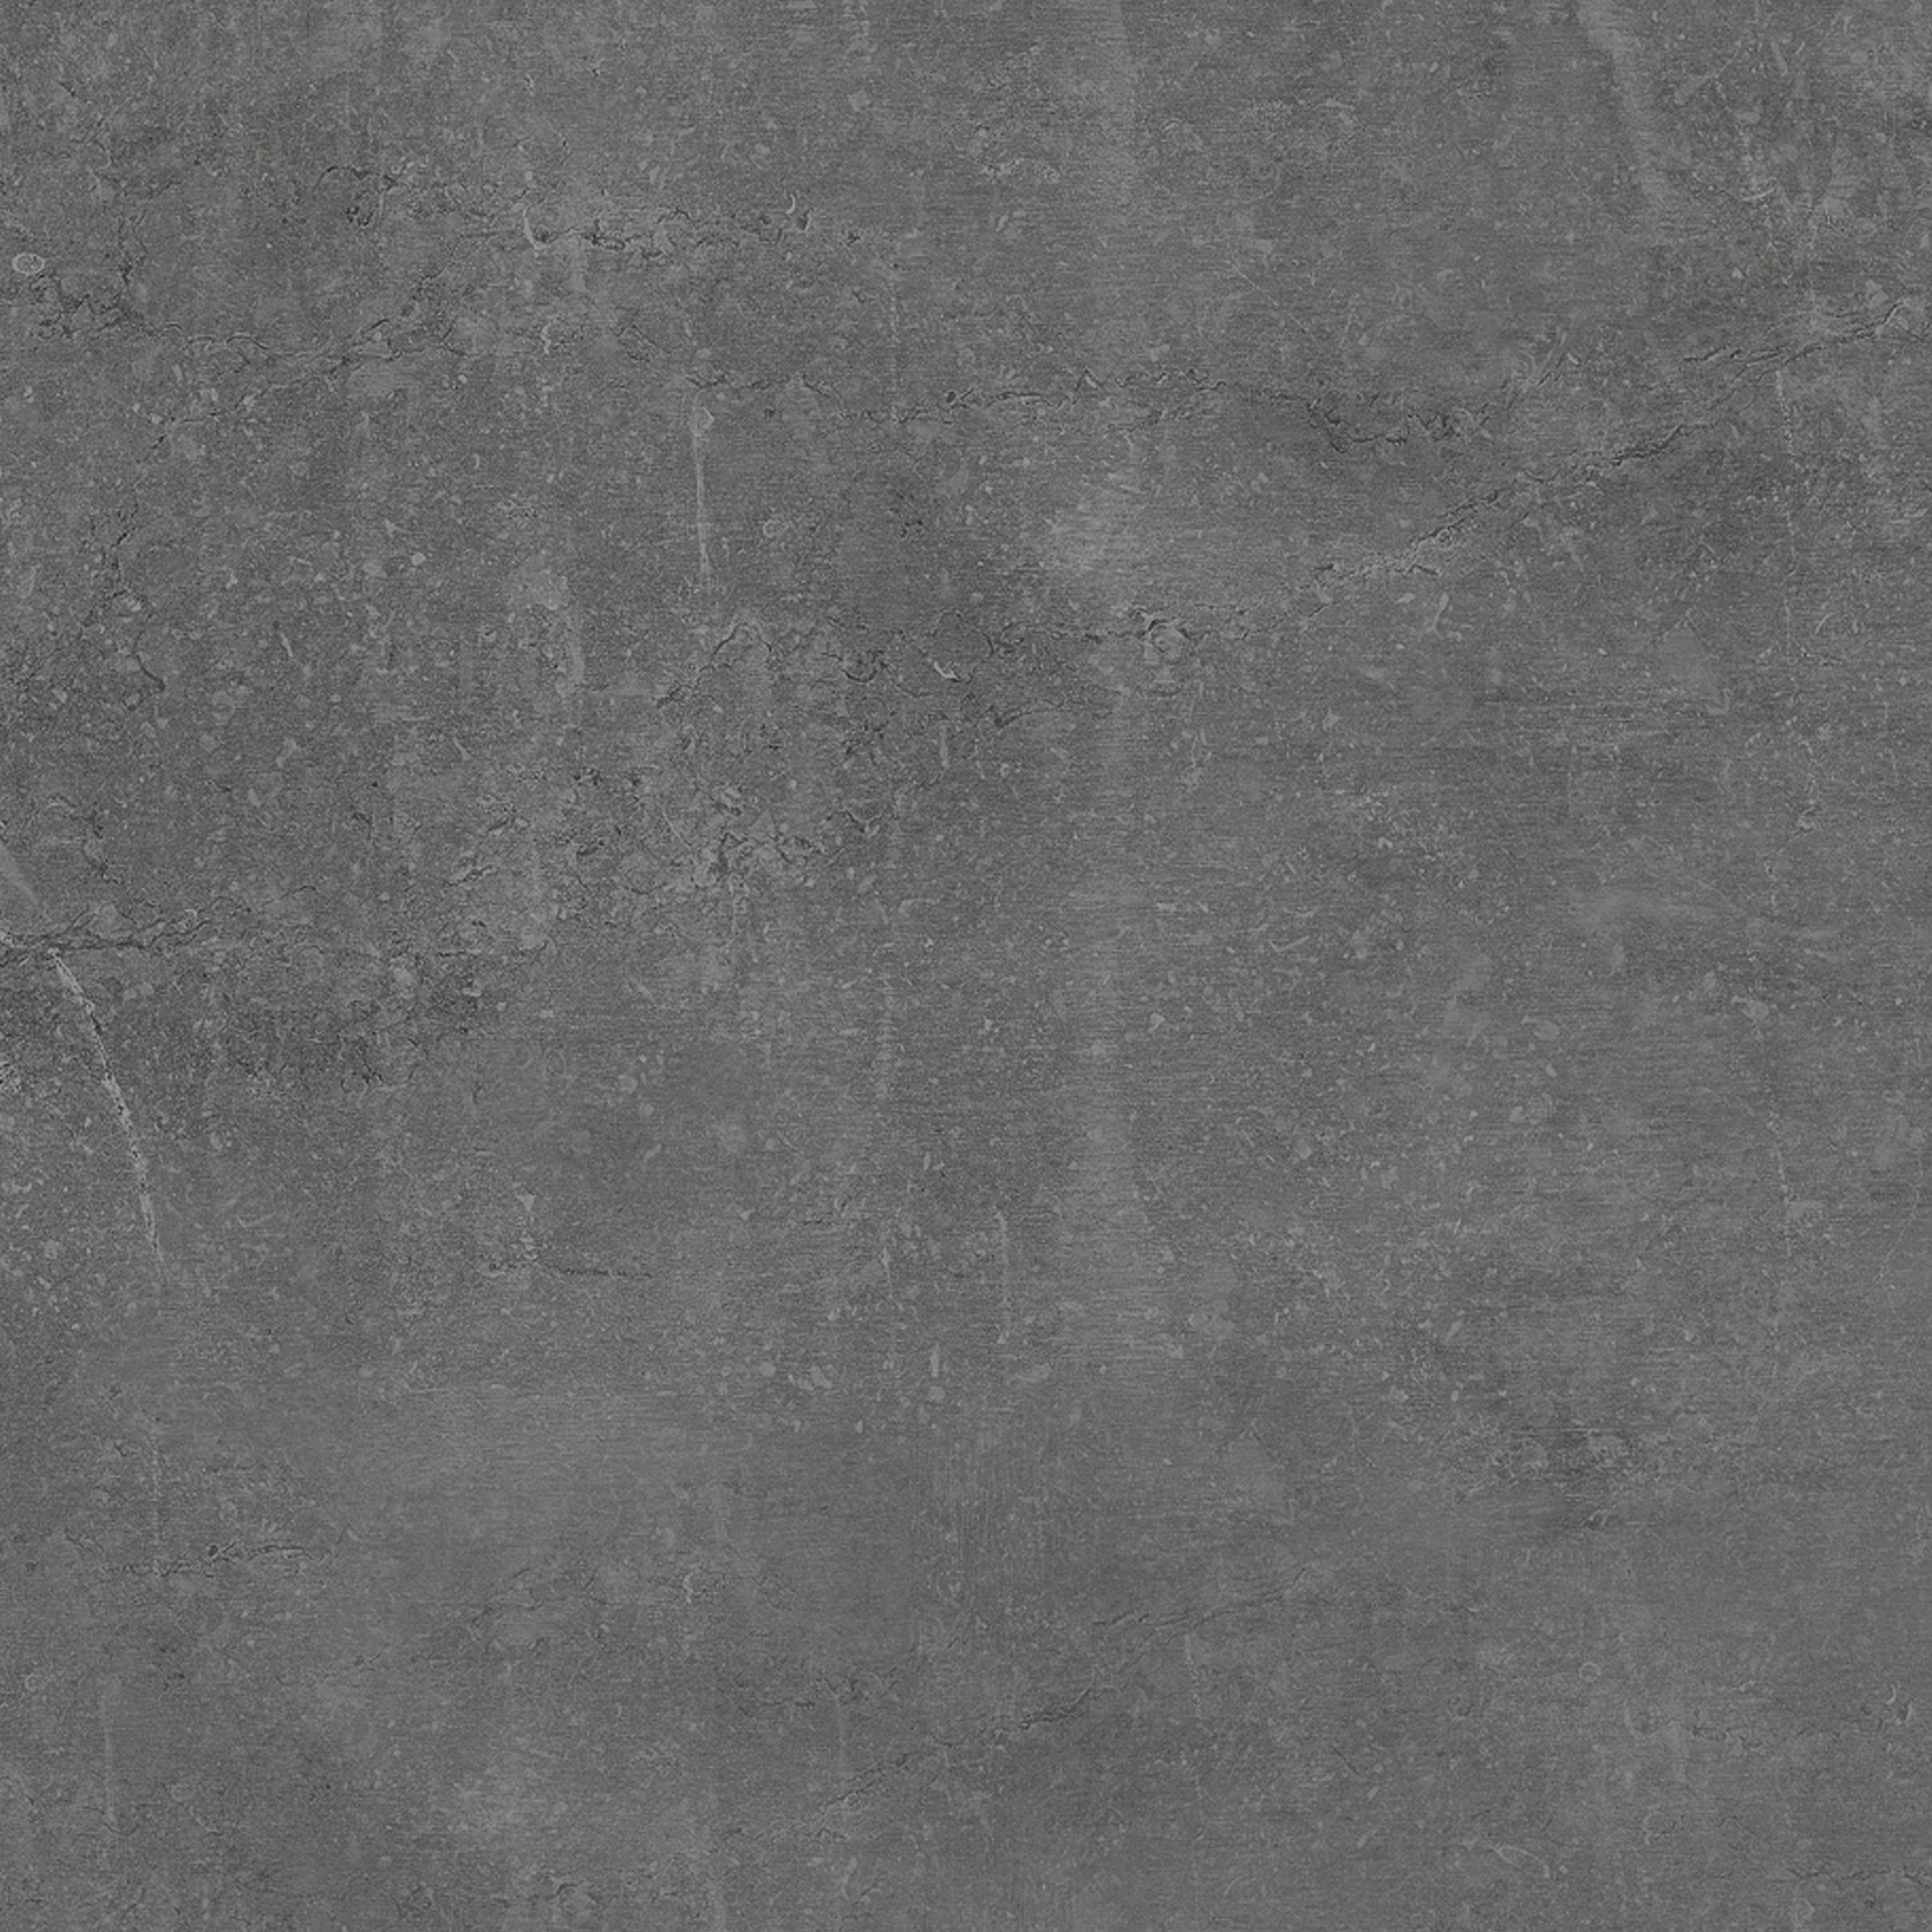 graphite pattern glazed porcelain field tile from nexus anatolia collection distributed by surface group international matte finish pressed edge 13x13 square shape